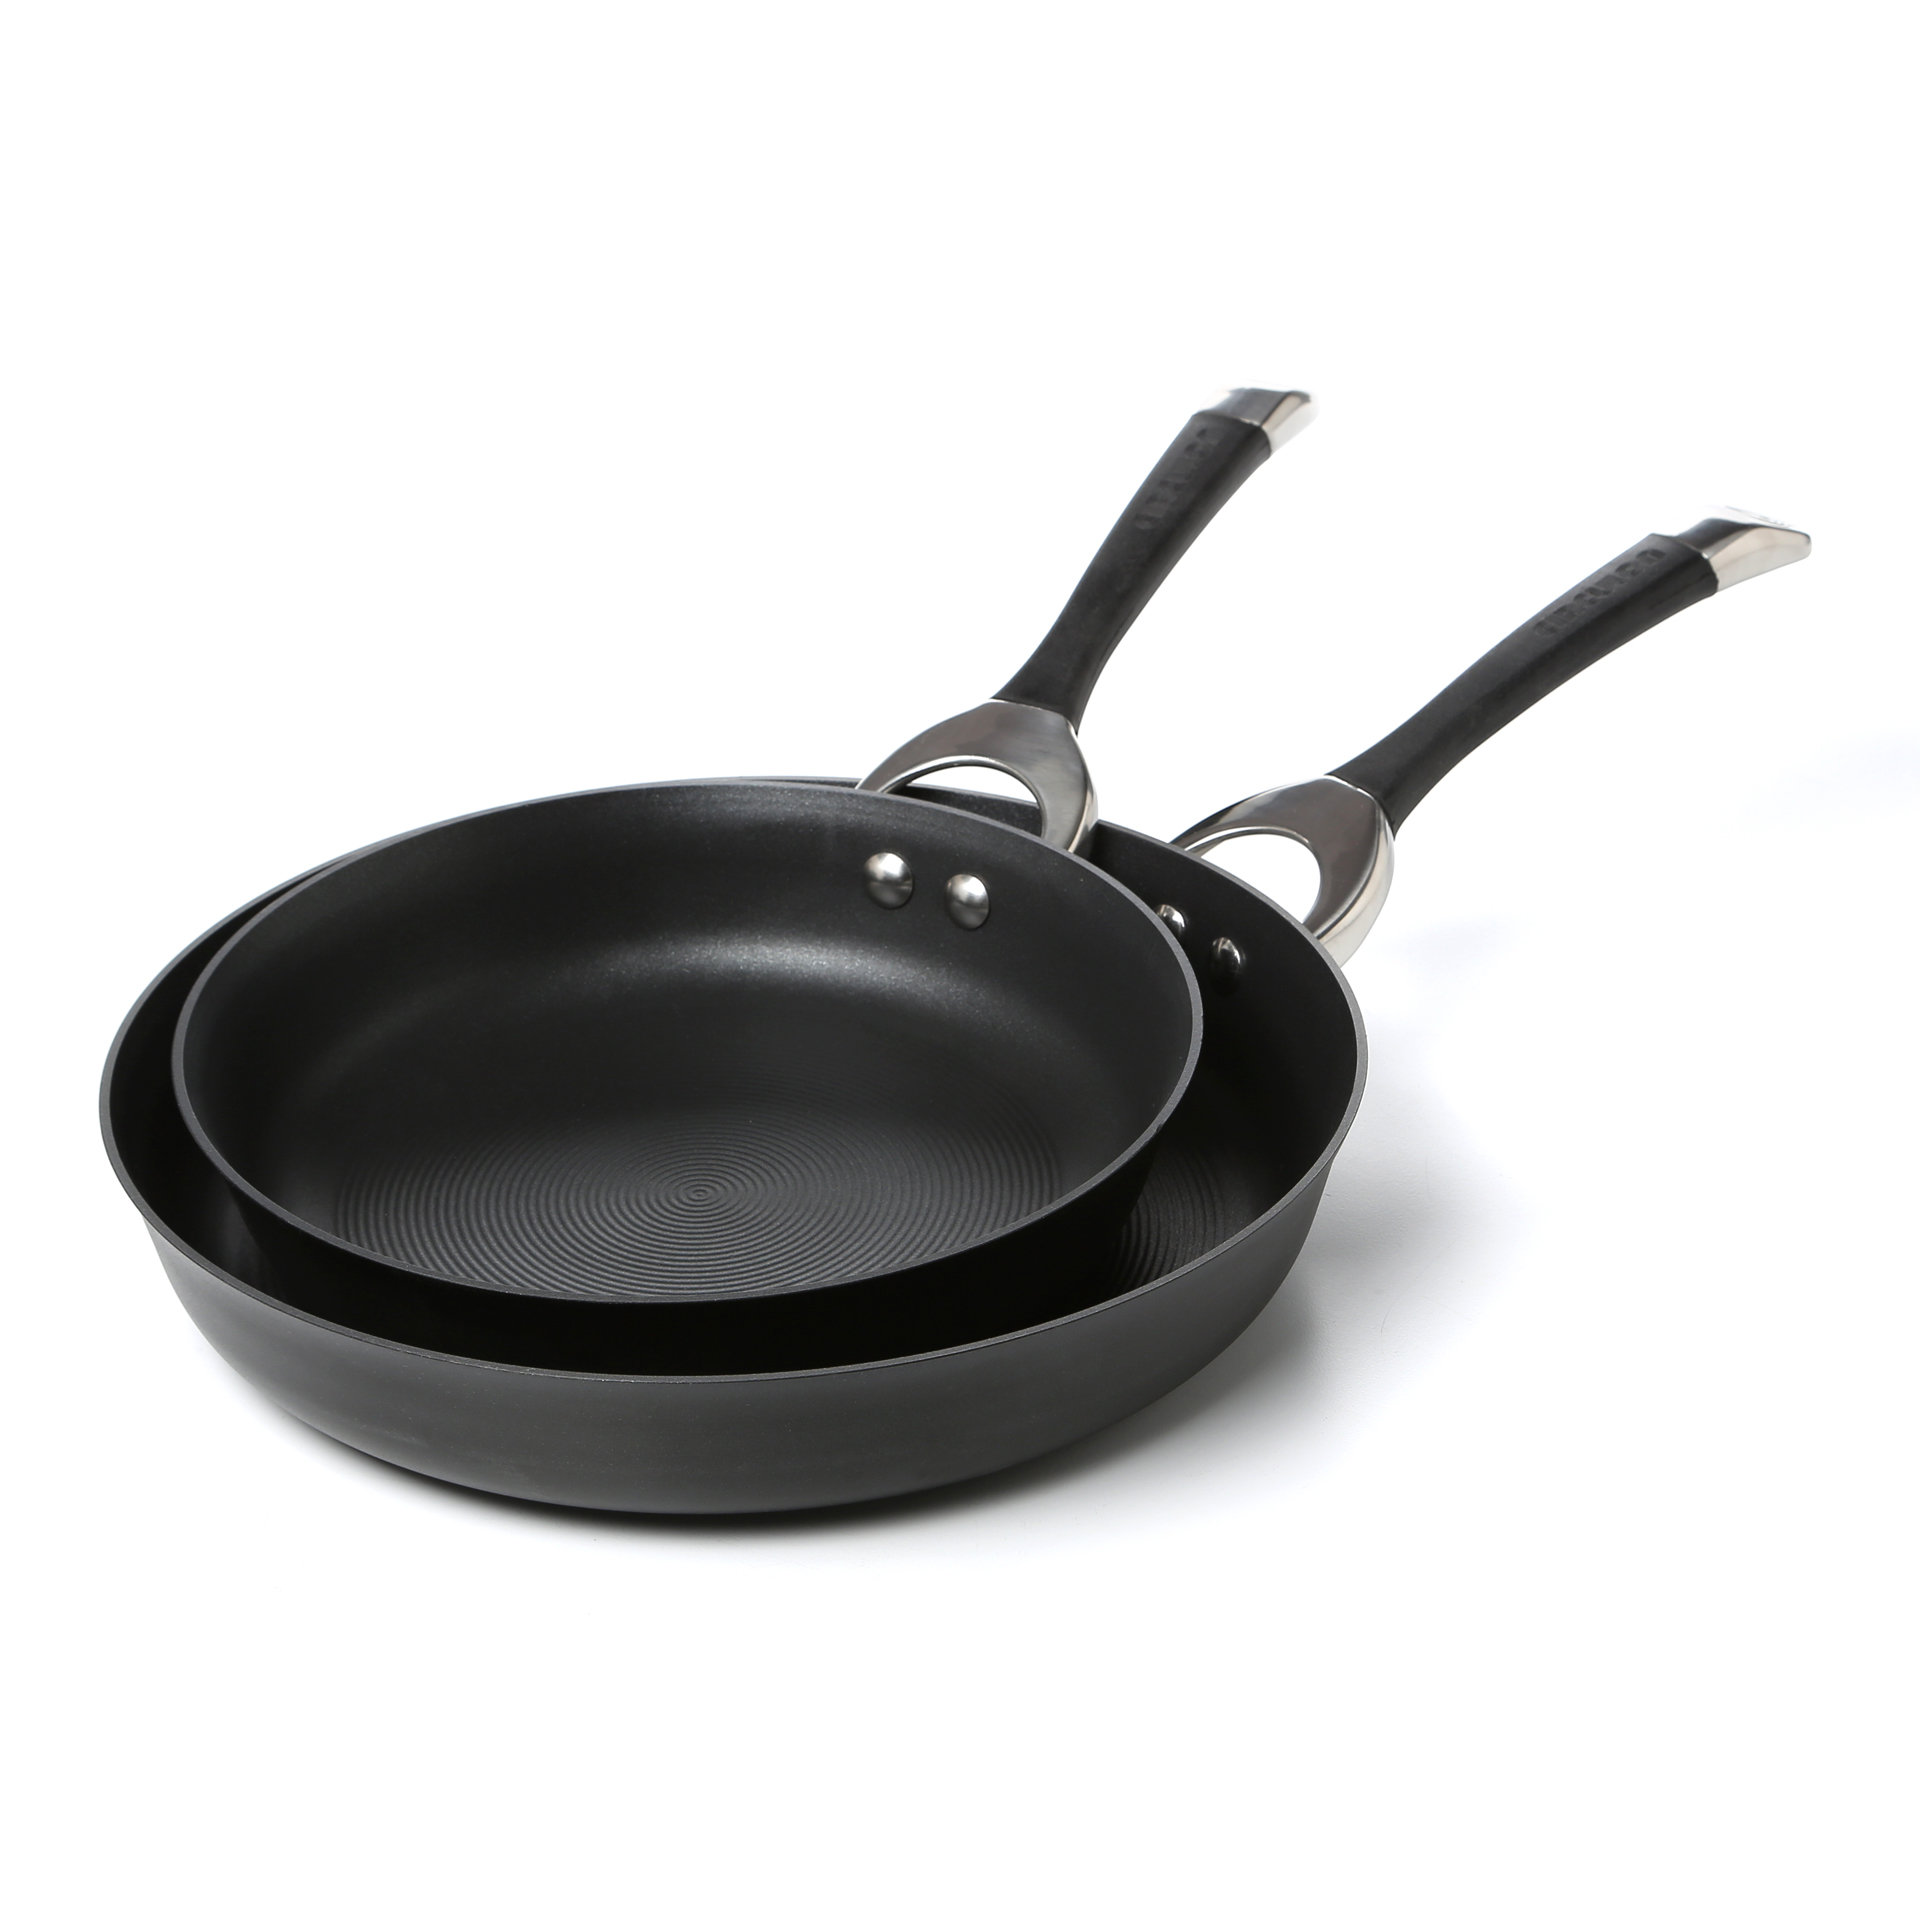 Circulon A1 Series with ScratchDefense Technology 2pc 8.5 and 10 Nonstick Induction Frying Pan Set - Graphite